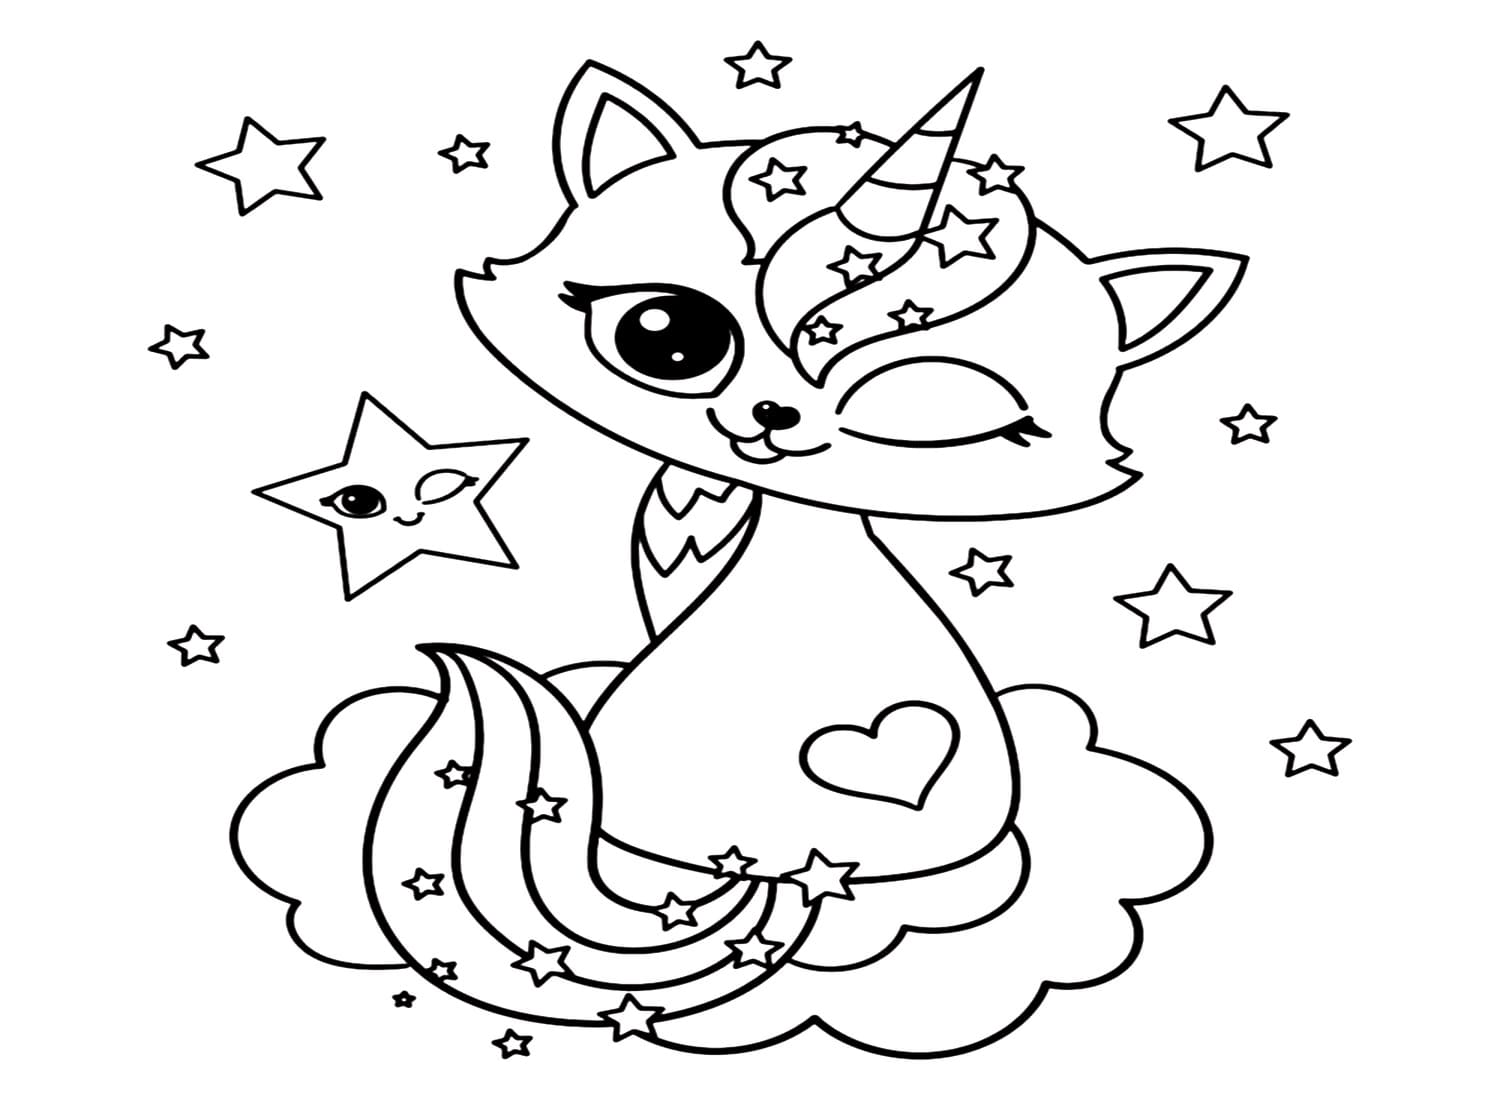 Lovely Unicorn Cat coloring page - Download, Print or Color Online for Free